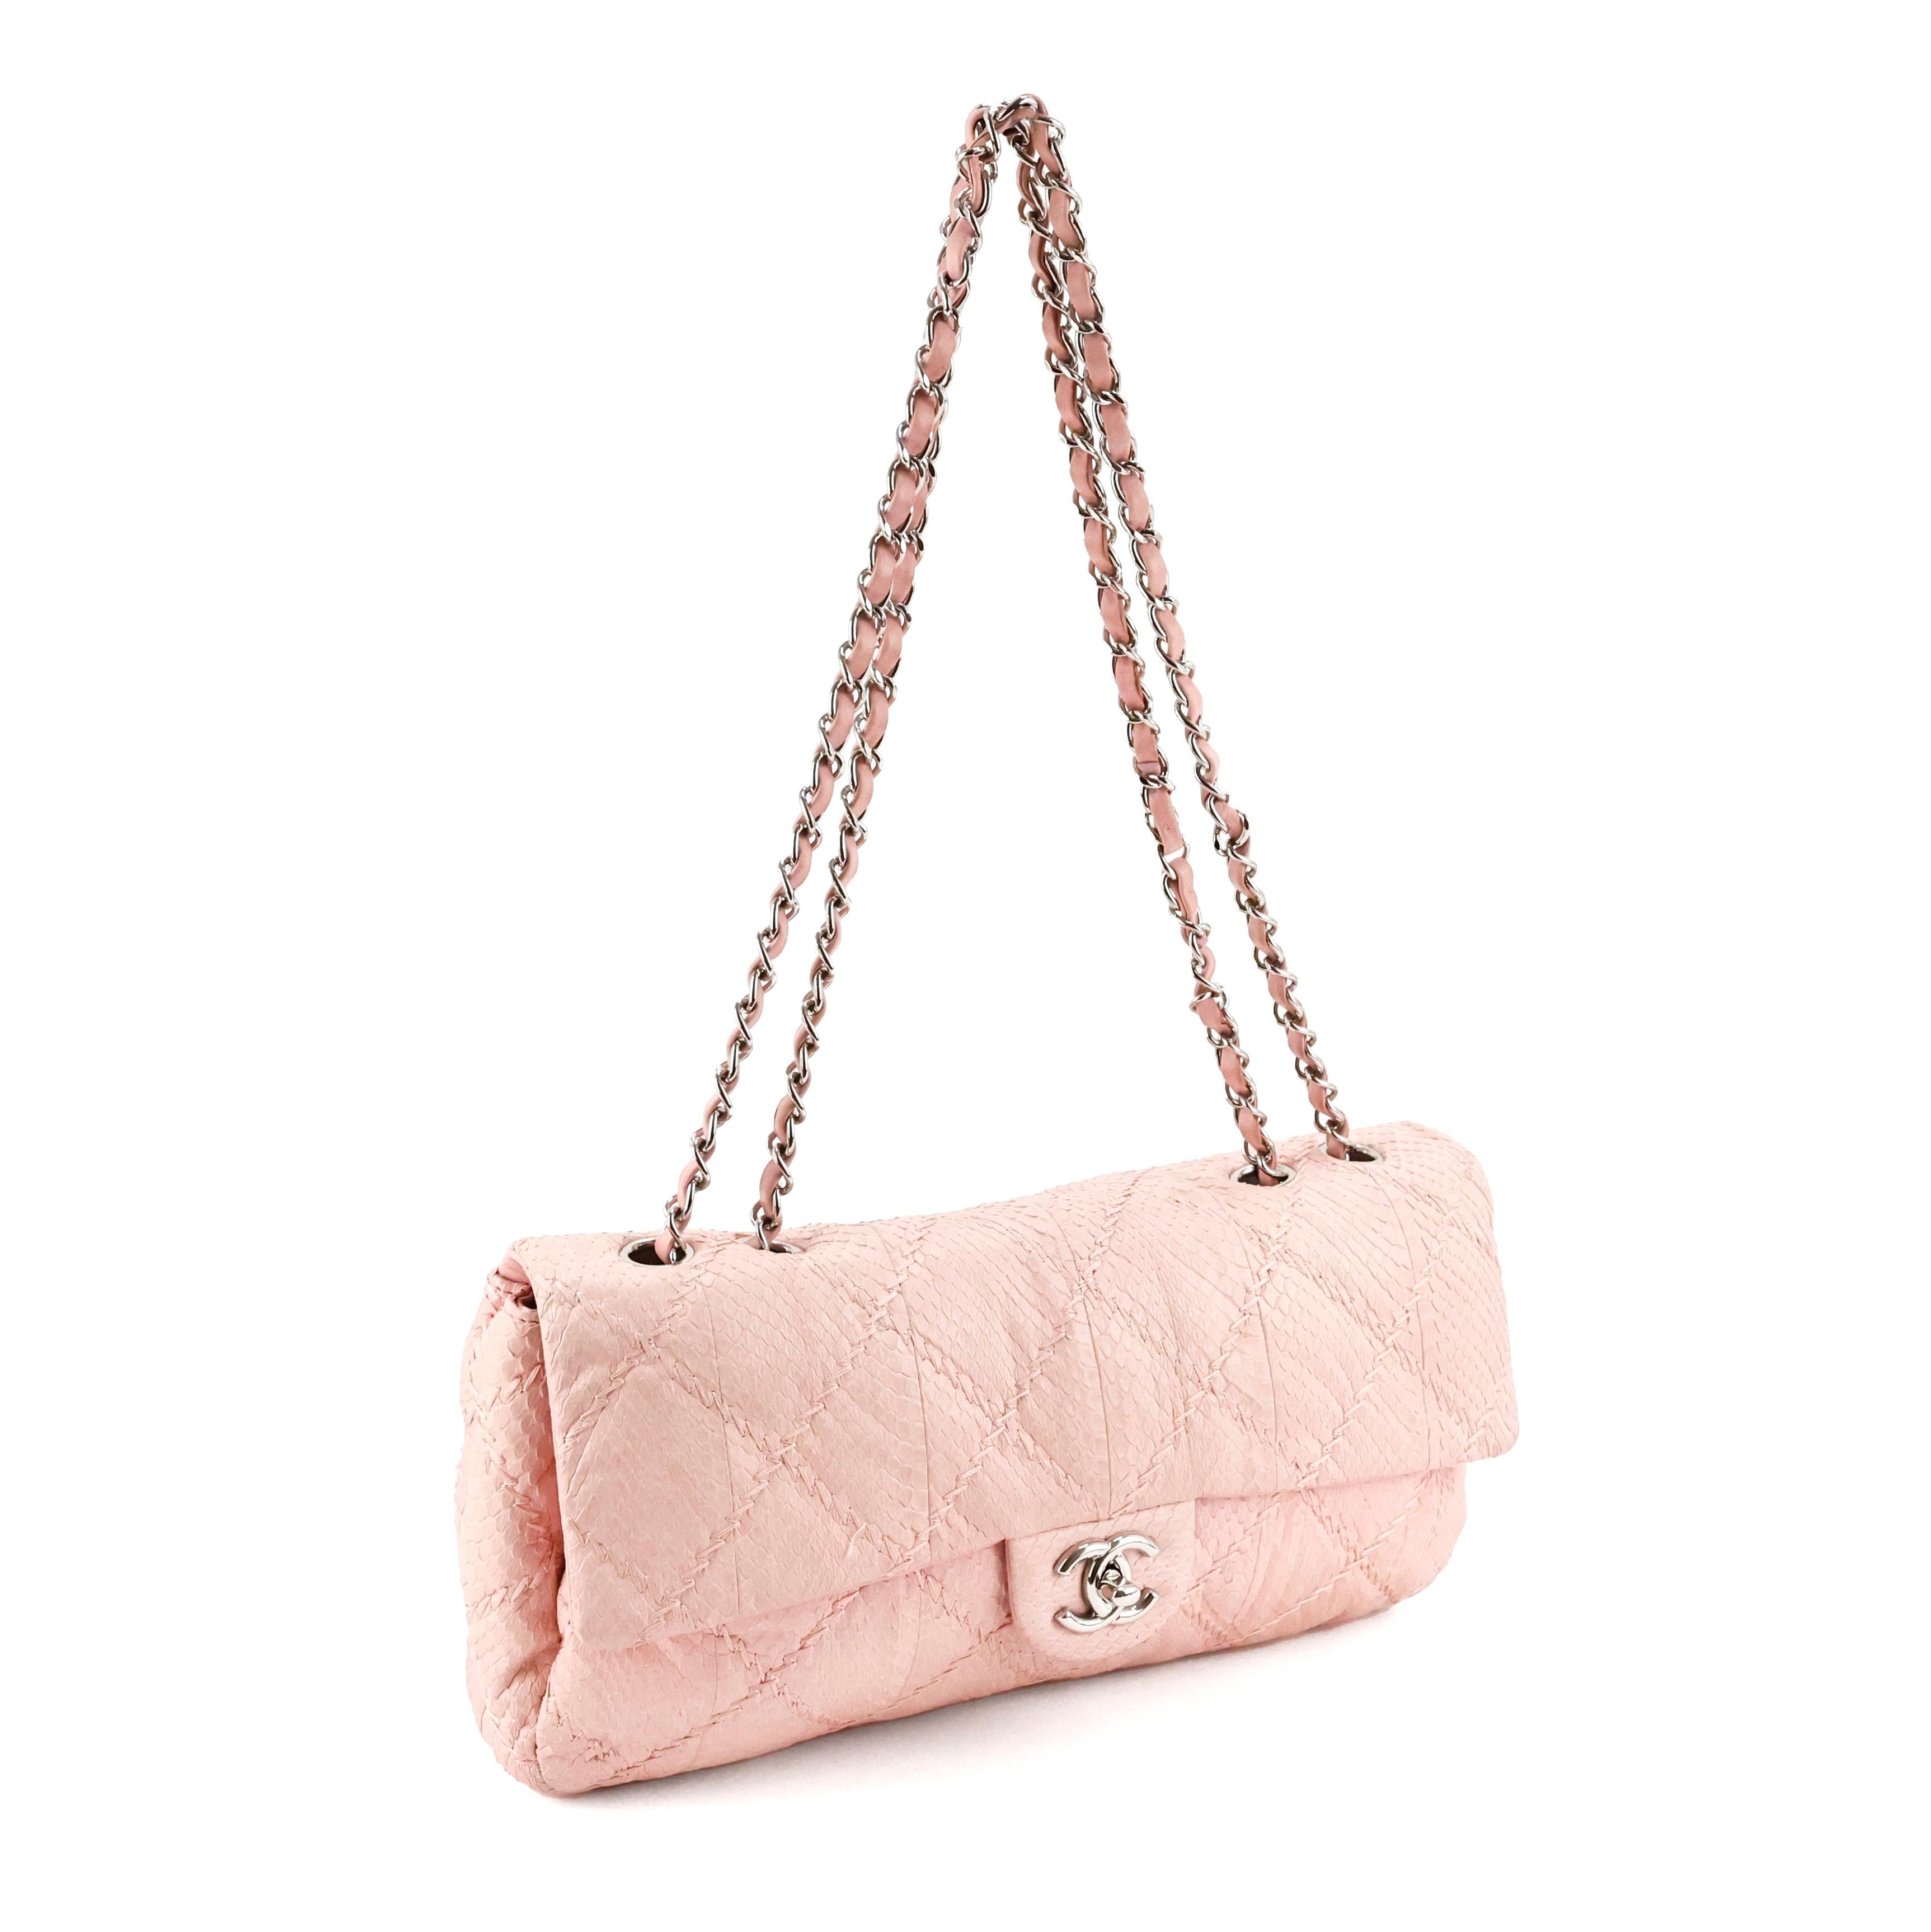 Chanel Classic Flap Bag in light pink Python leather For Sale 2